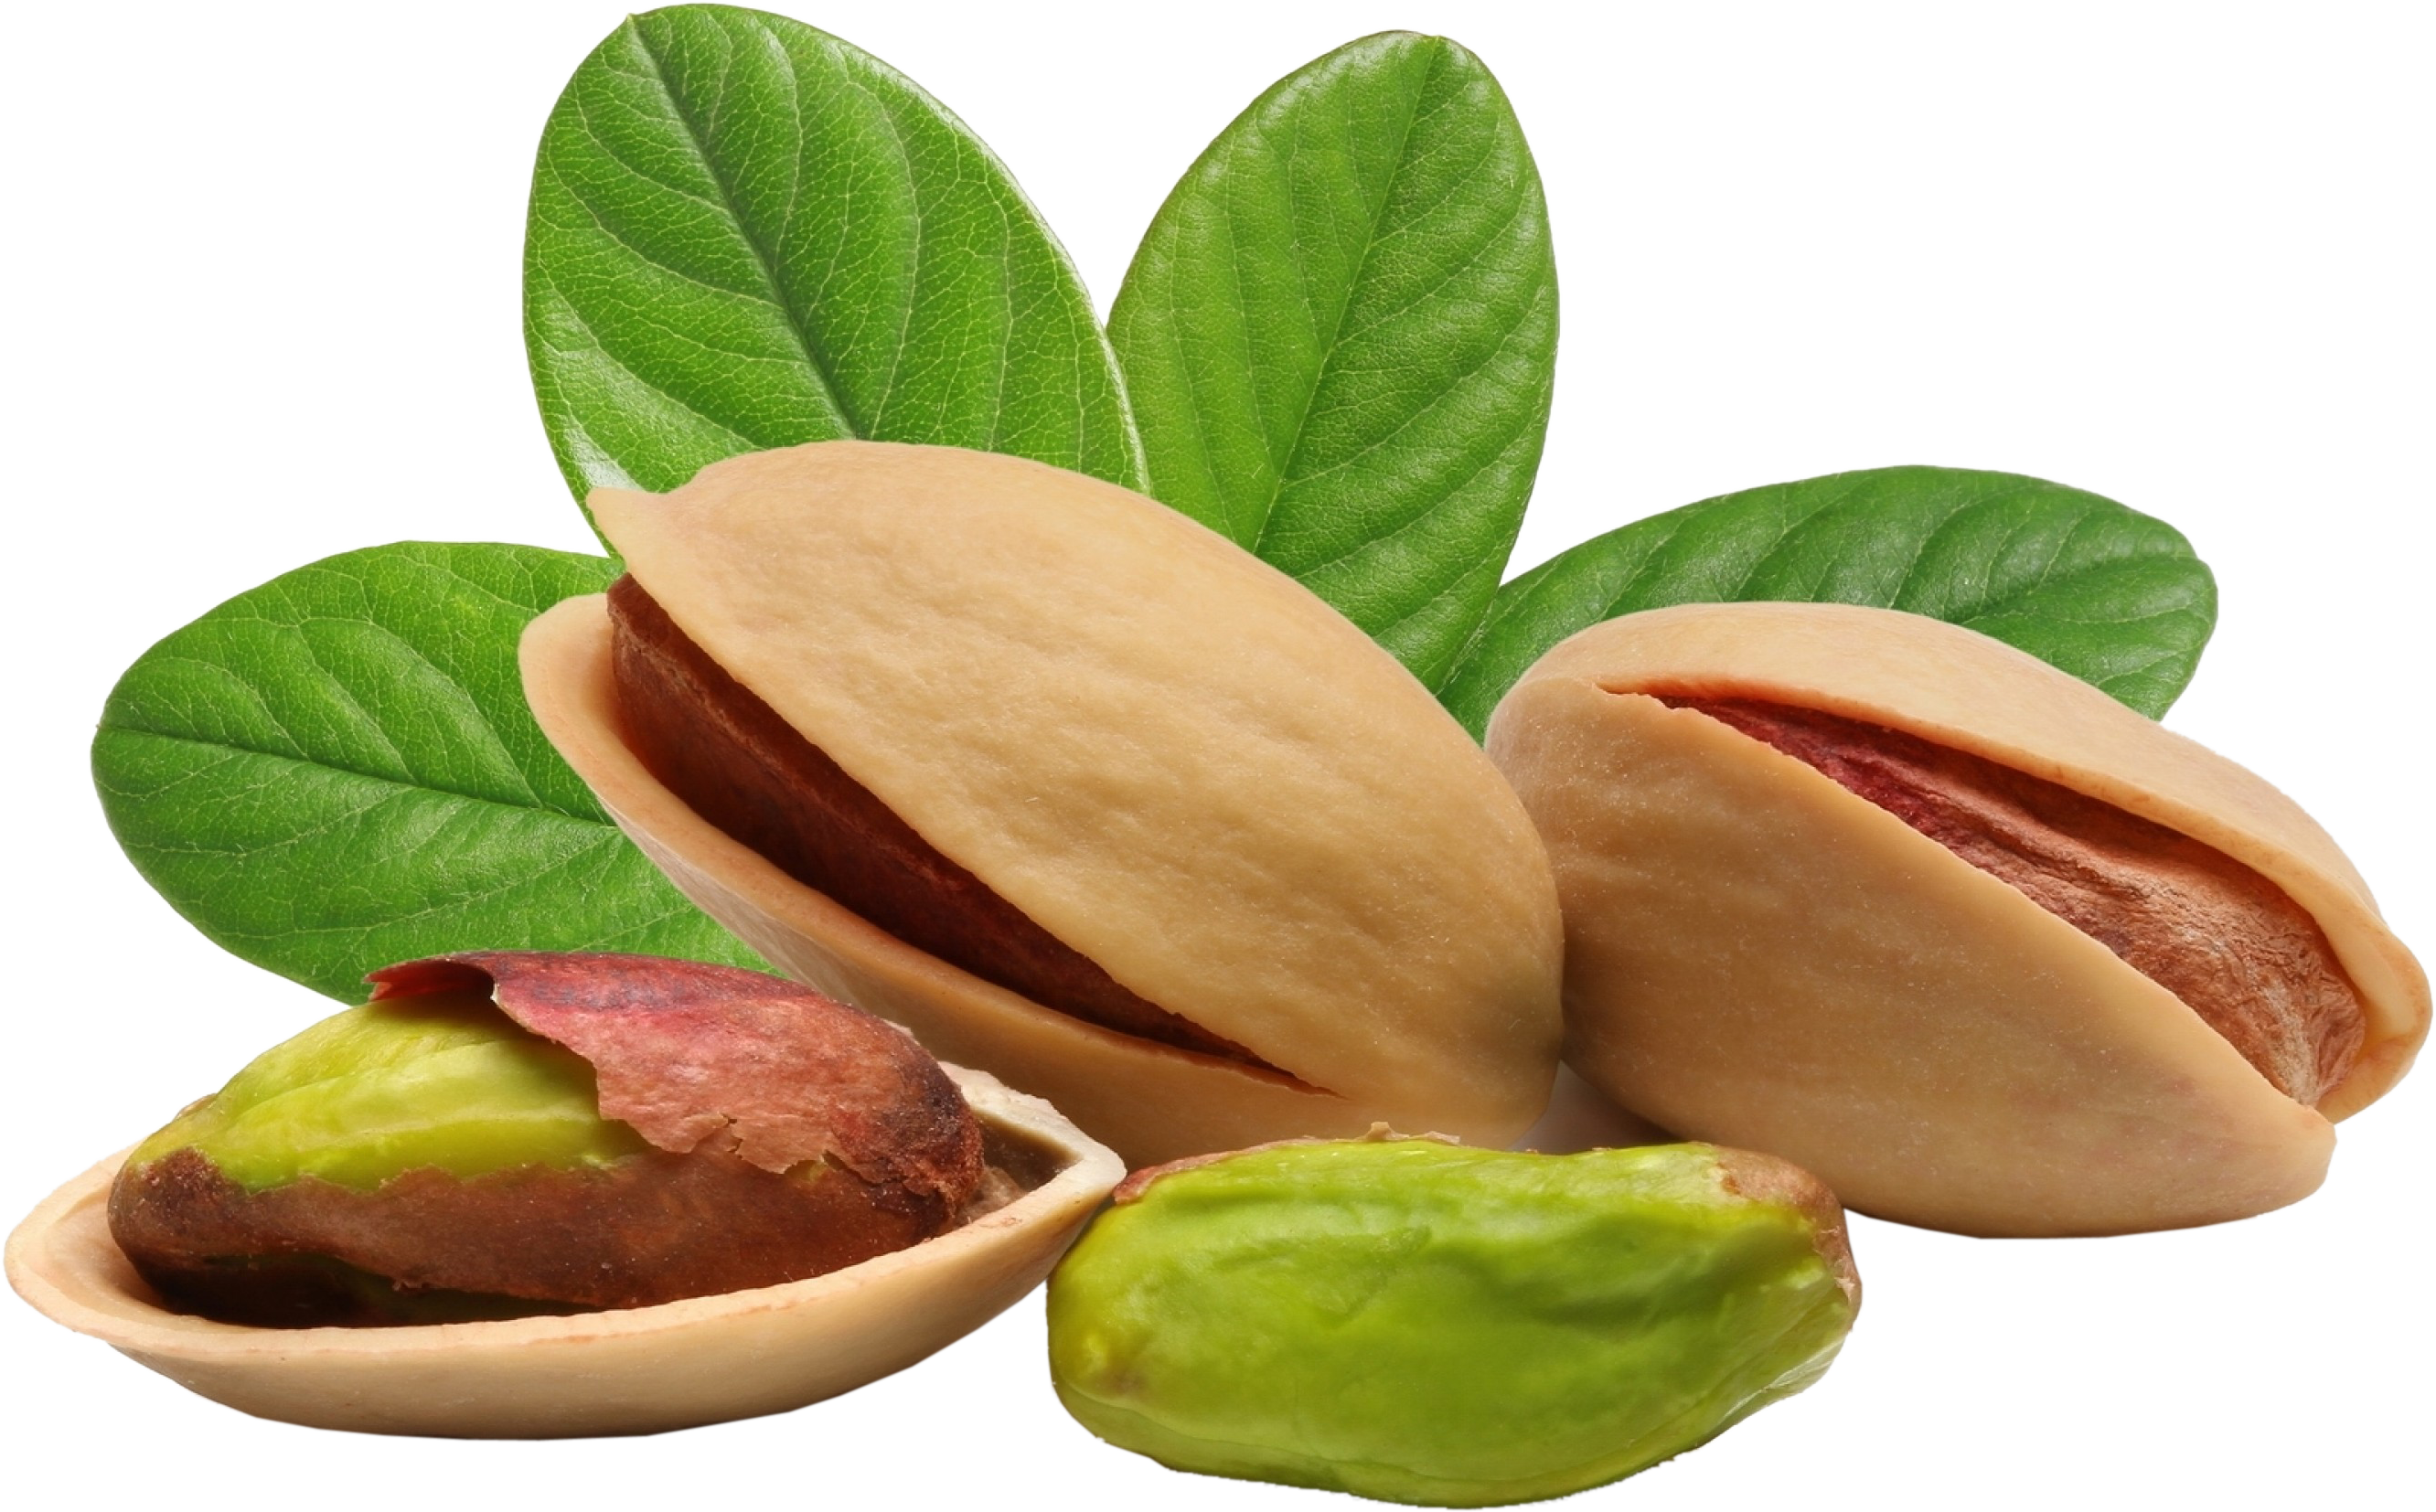 Wholesale price of pistachios in Istanbul